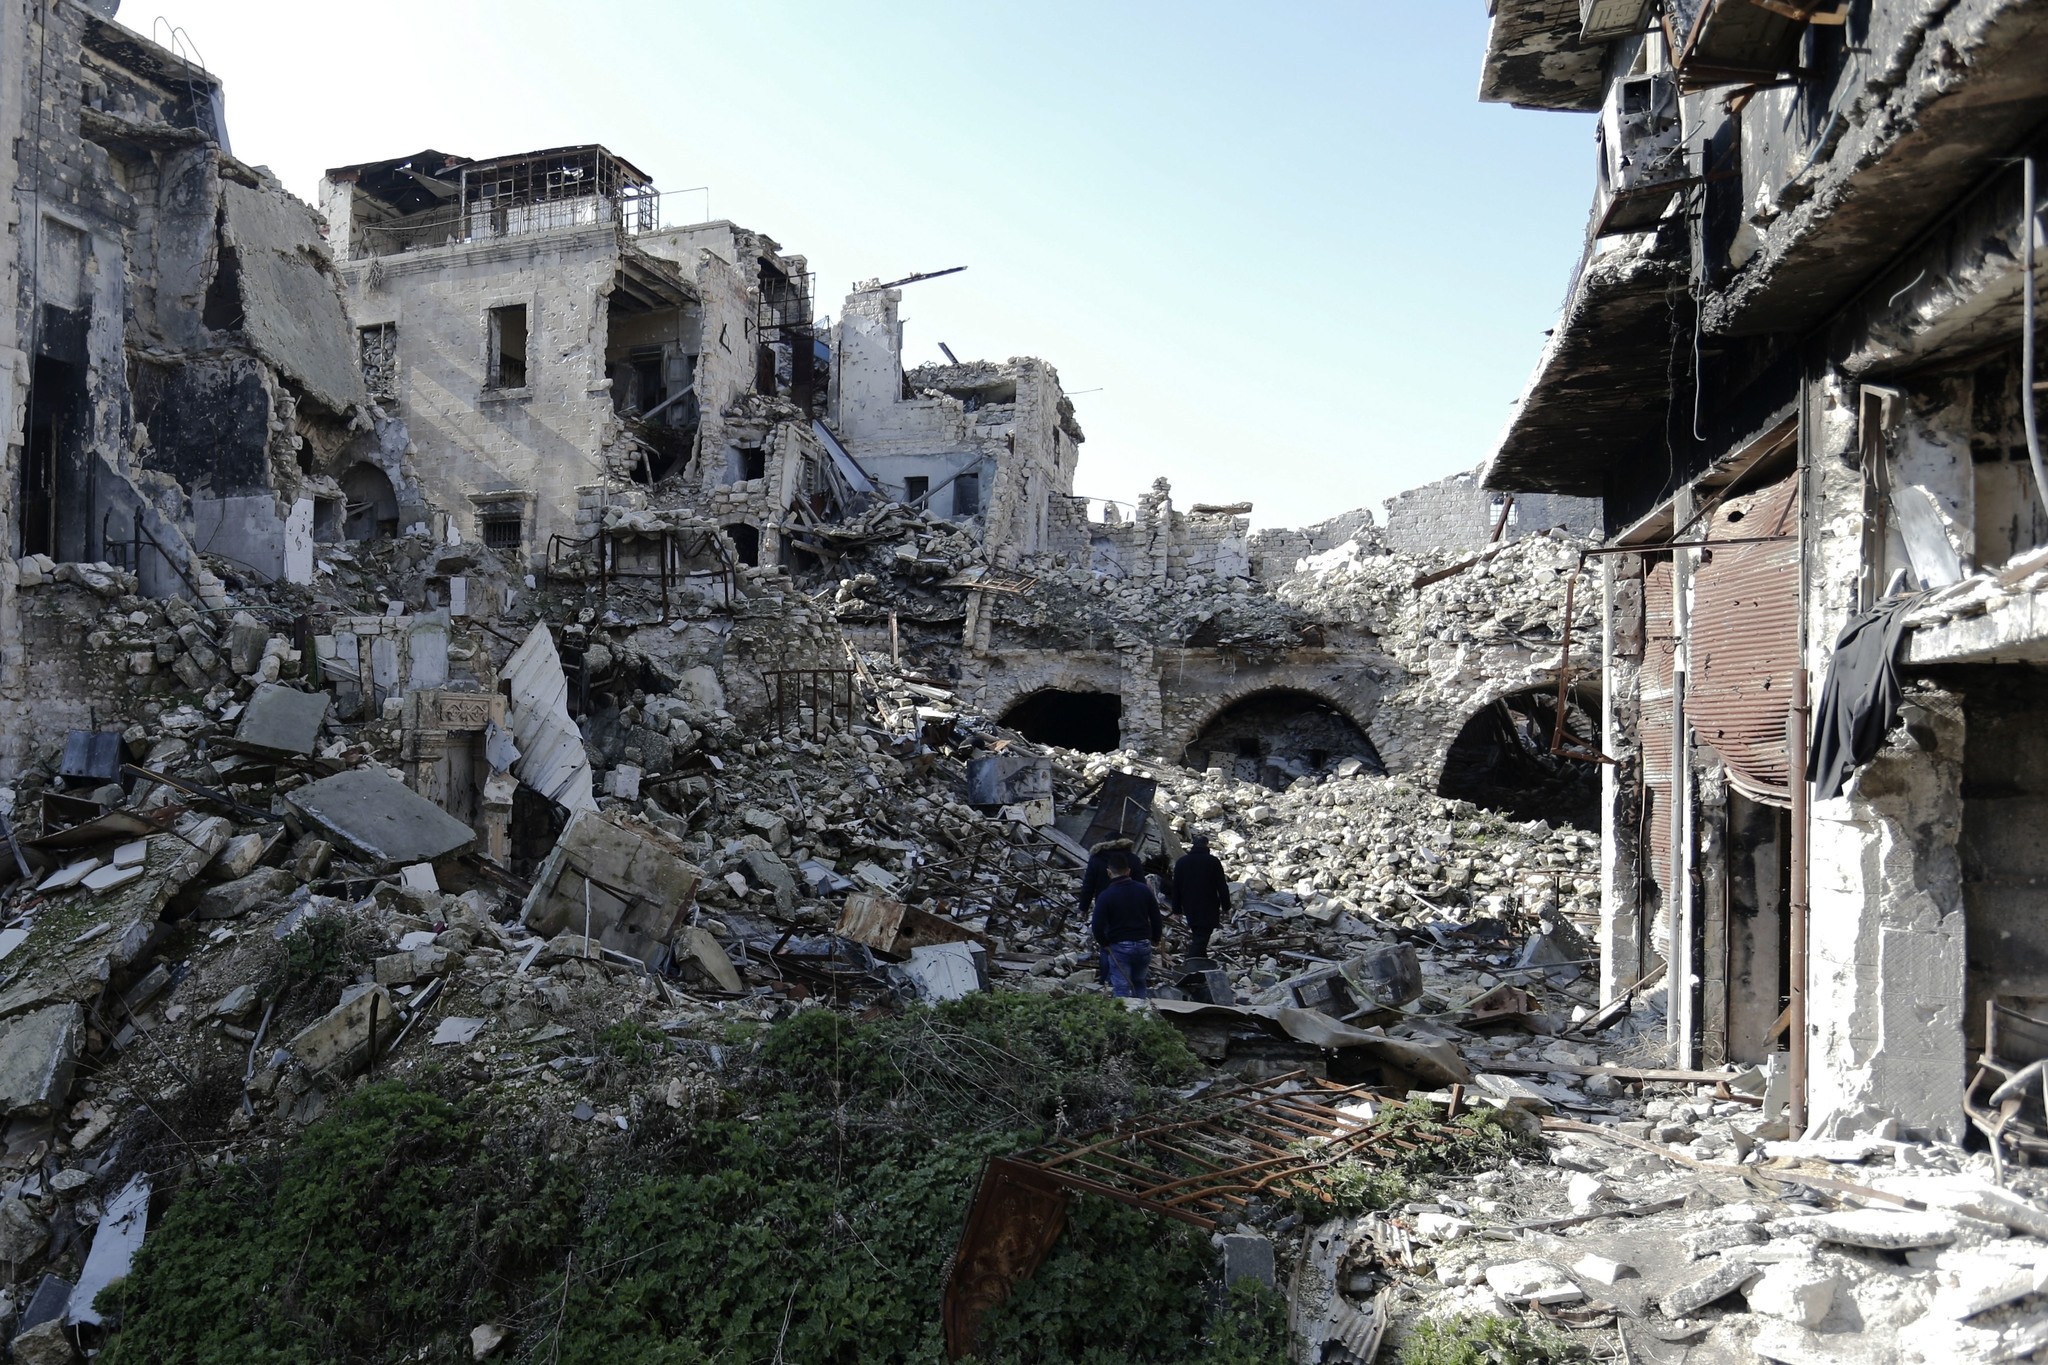 Syrians walk through the destruction in the old city of Aleppo, Syria, Saturday, Jan. 21, 2017. (AP Photo)